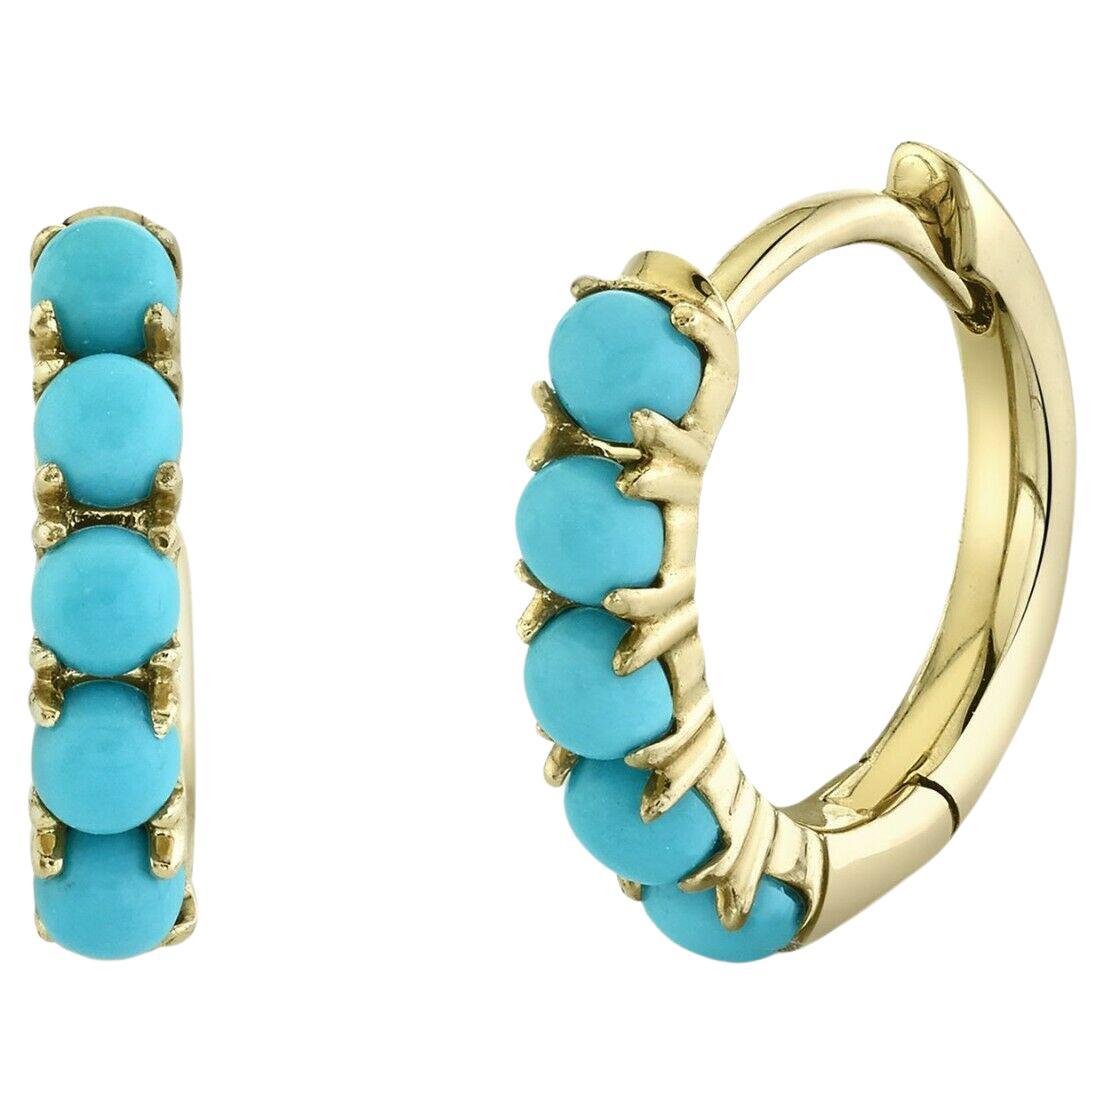 Cabochon 0.43 Carat Turquoise Yellow Gold Huggie Hoop Earrings For Sale